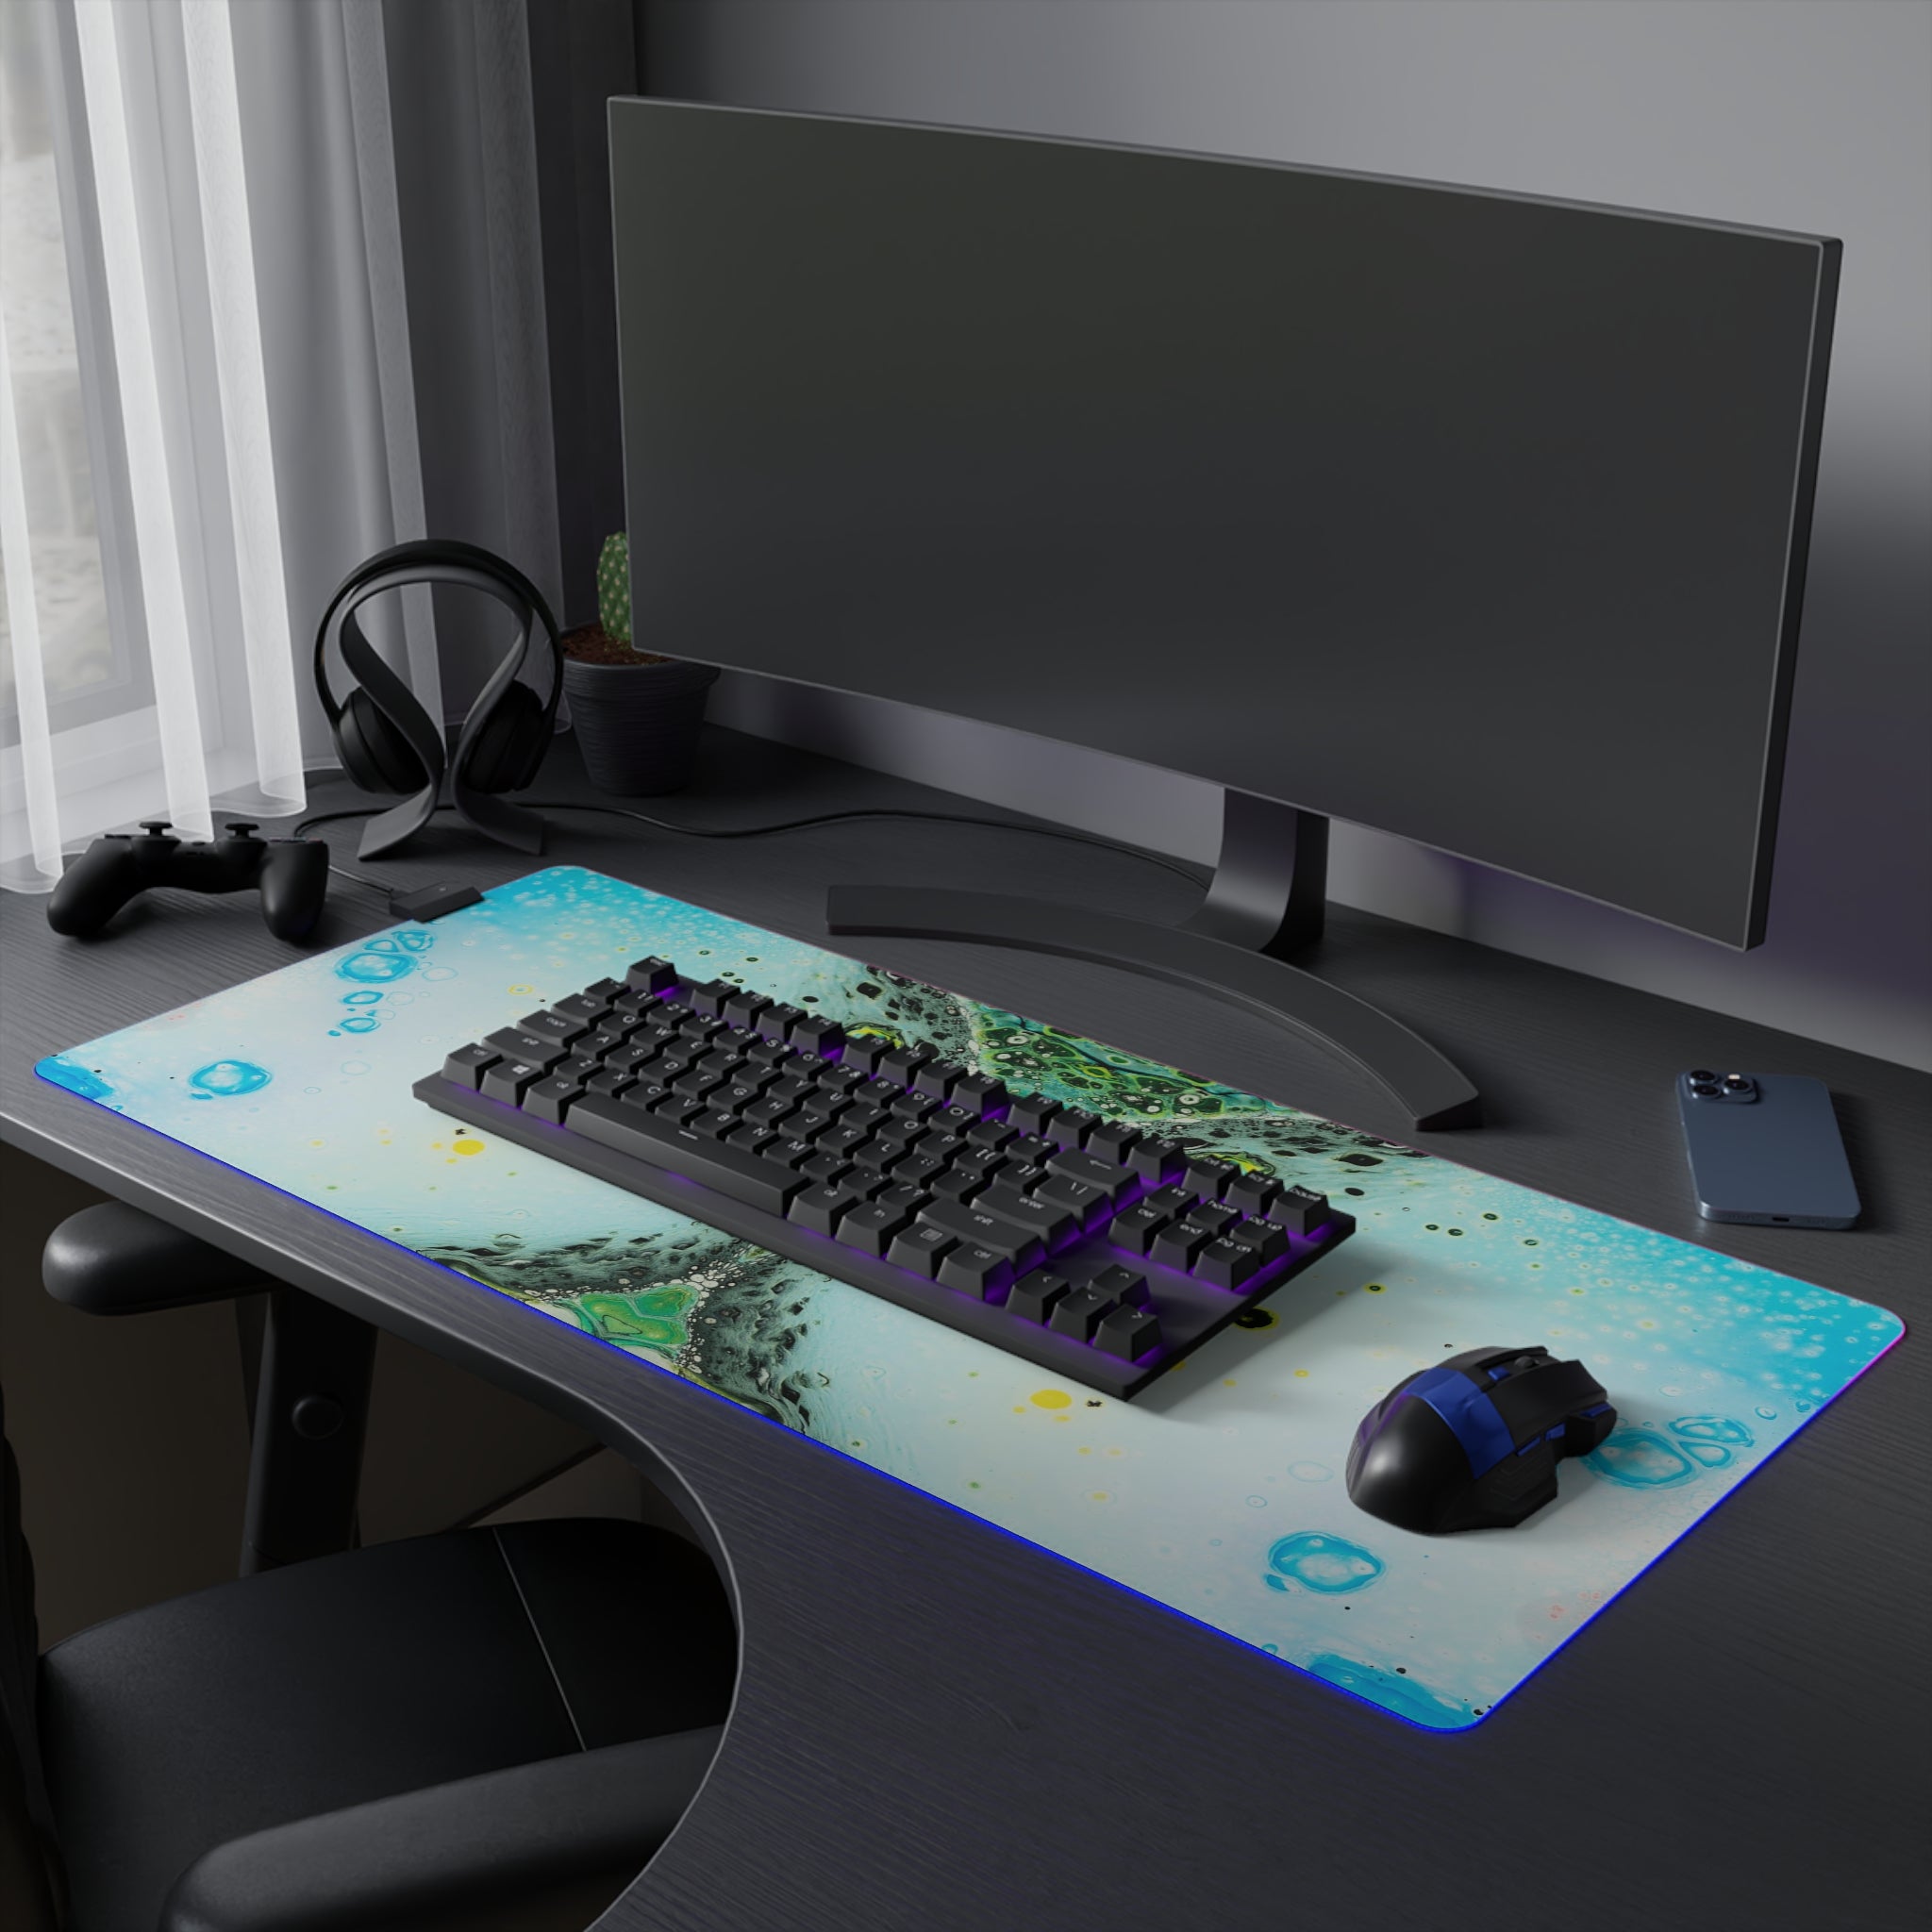 North Pole - LED Gaming Mouse Pad